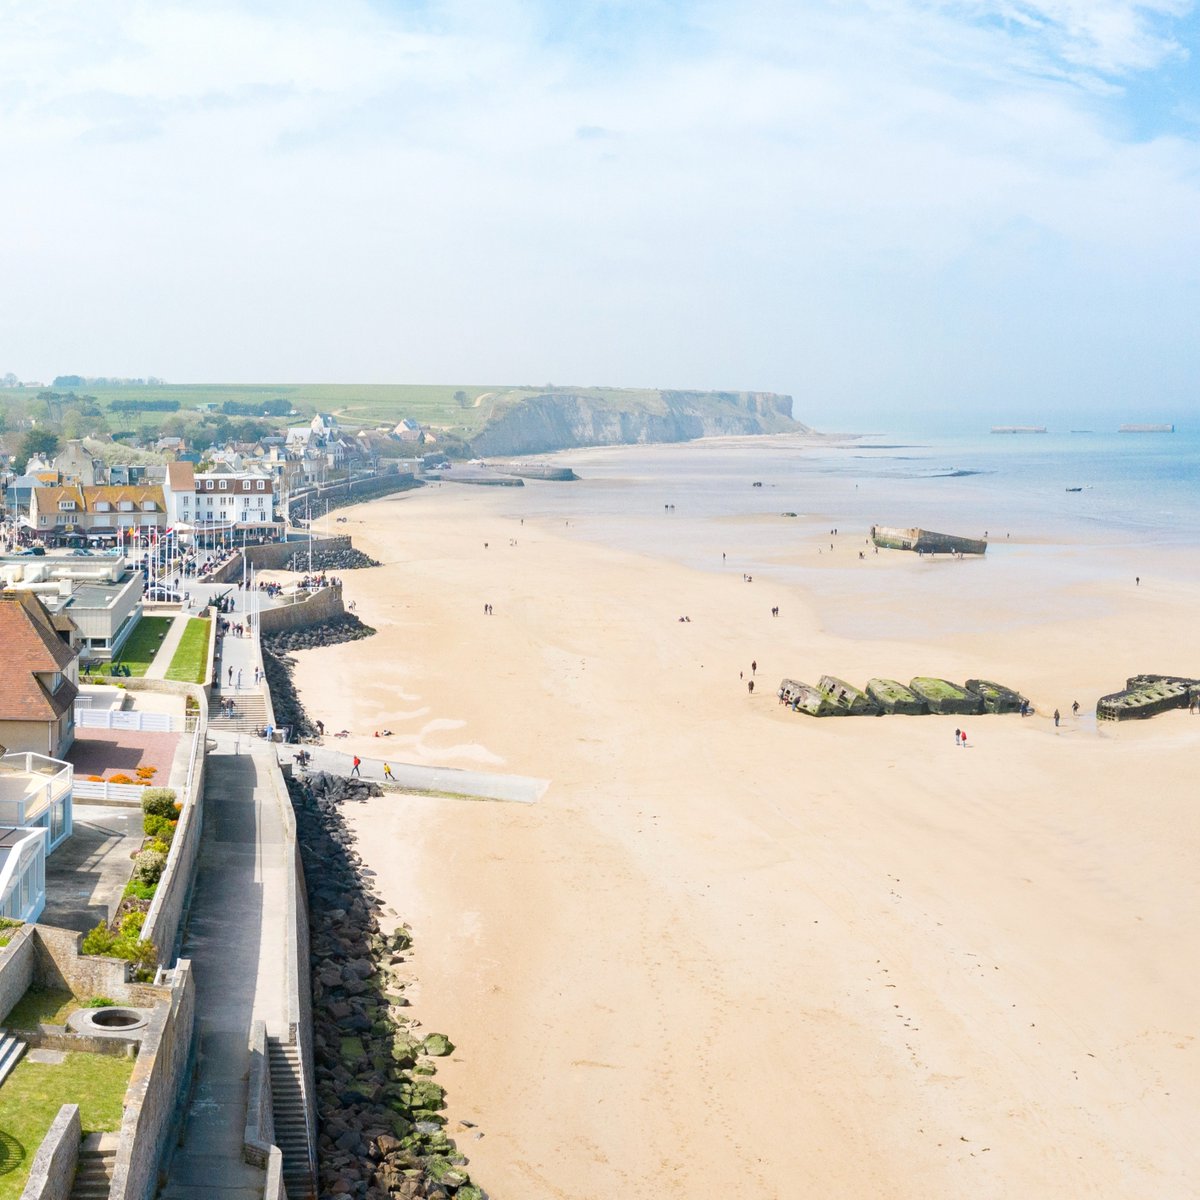 Do you know why this beach was named, ‘Gold Beach’? 🇫🇷 During the Second World War, 'Gold Beach' was the code name for one of the five locations of the Allied invasion of German-occupied France, as part of the Normandy landings on 06/06/1944. Learn more rb.gy/70upmd